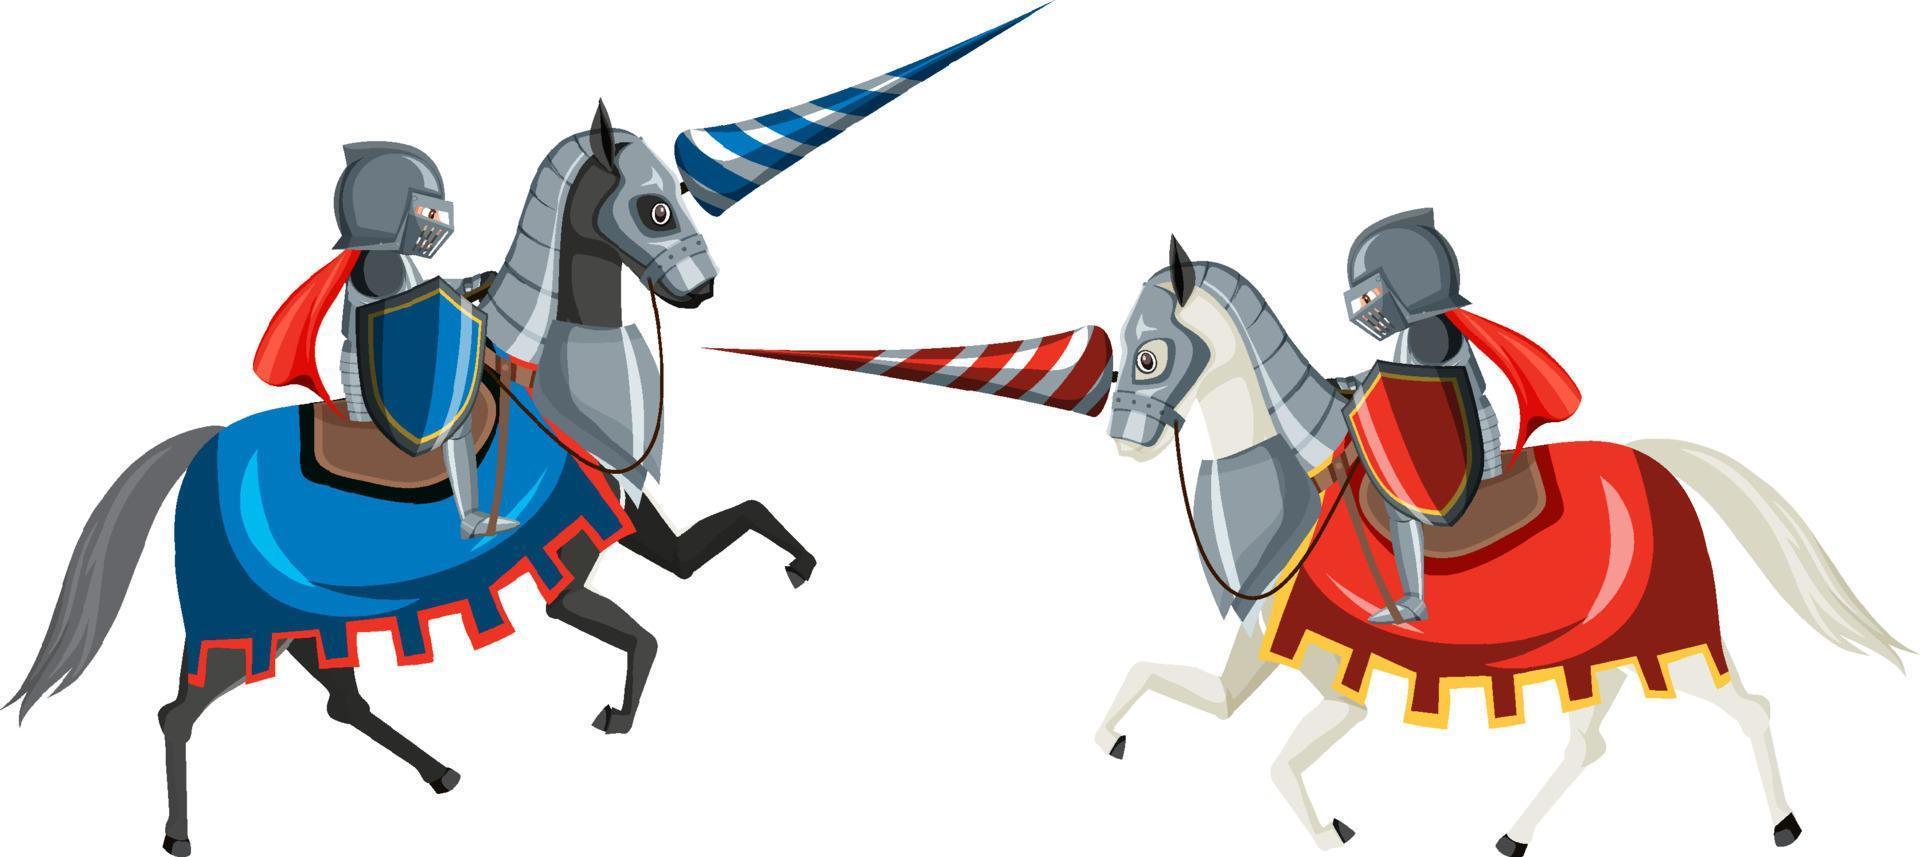 Medieval knight jousting tournament on white background vector